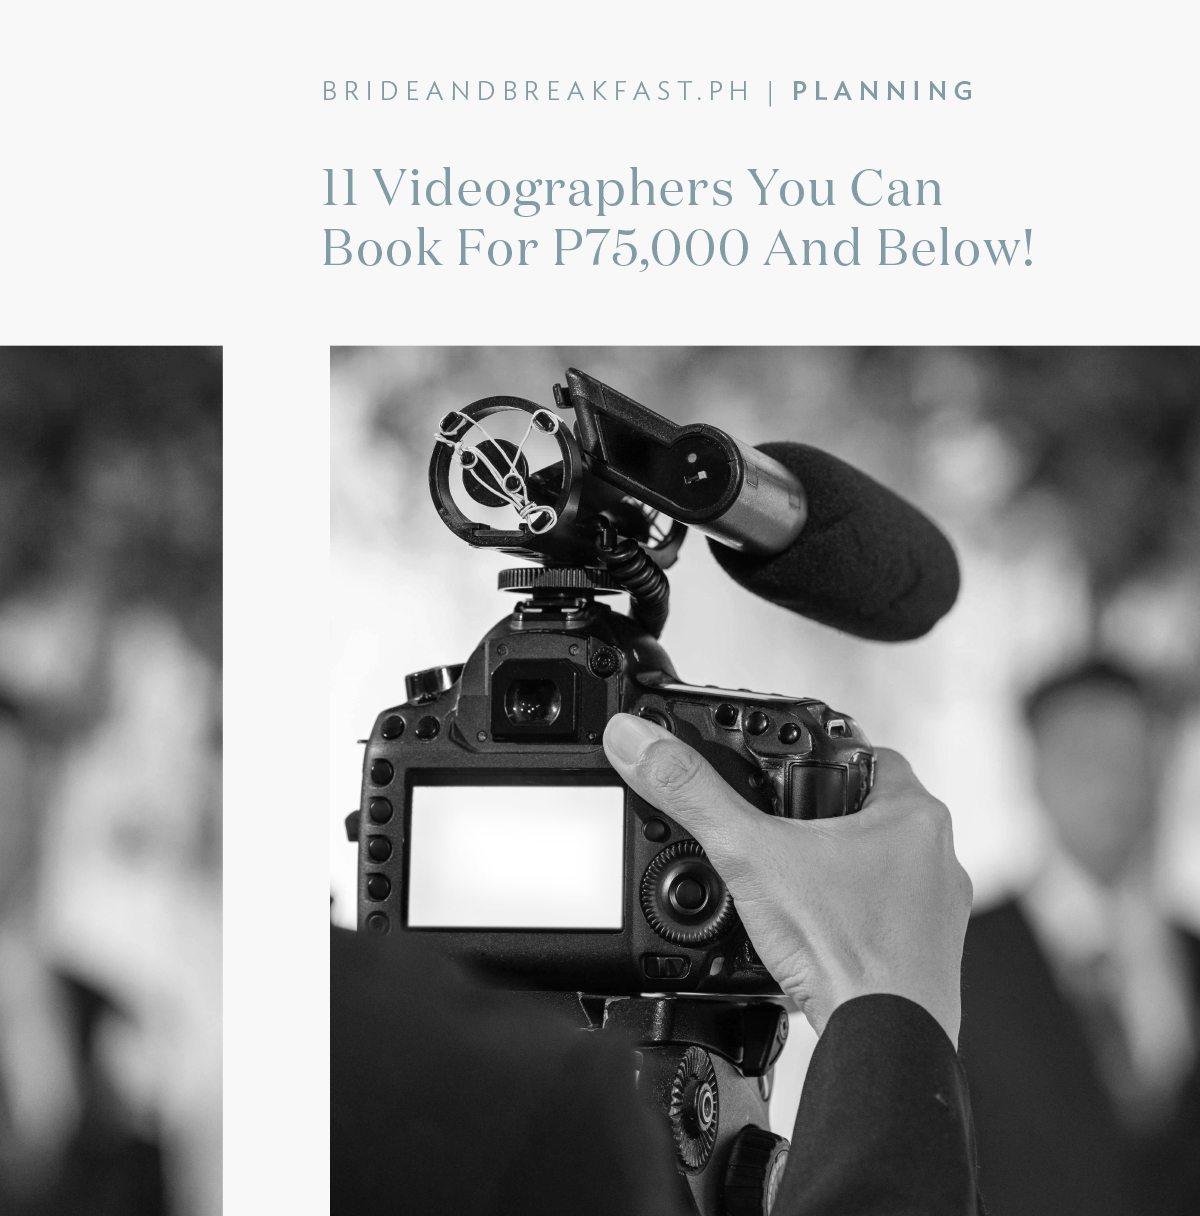 11 Videographers You Can Book for P75,000 and Below!